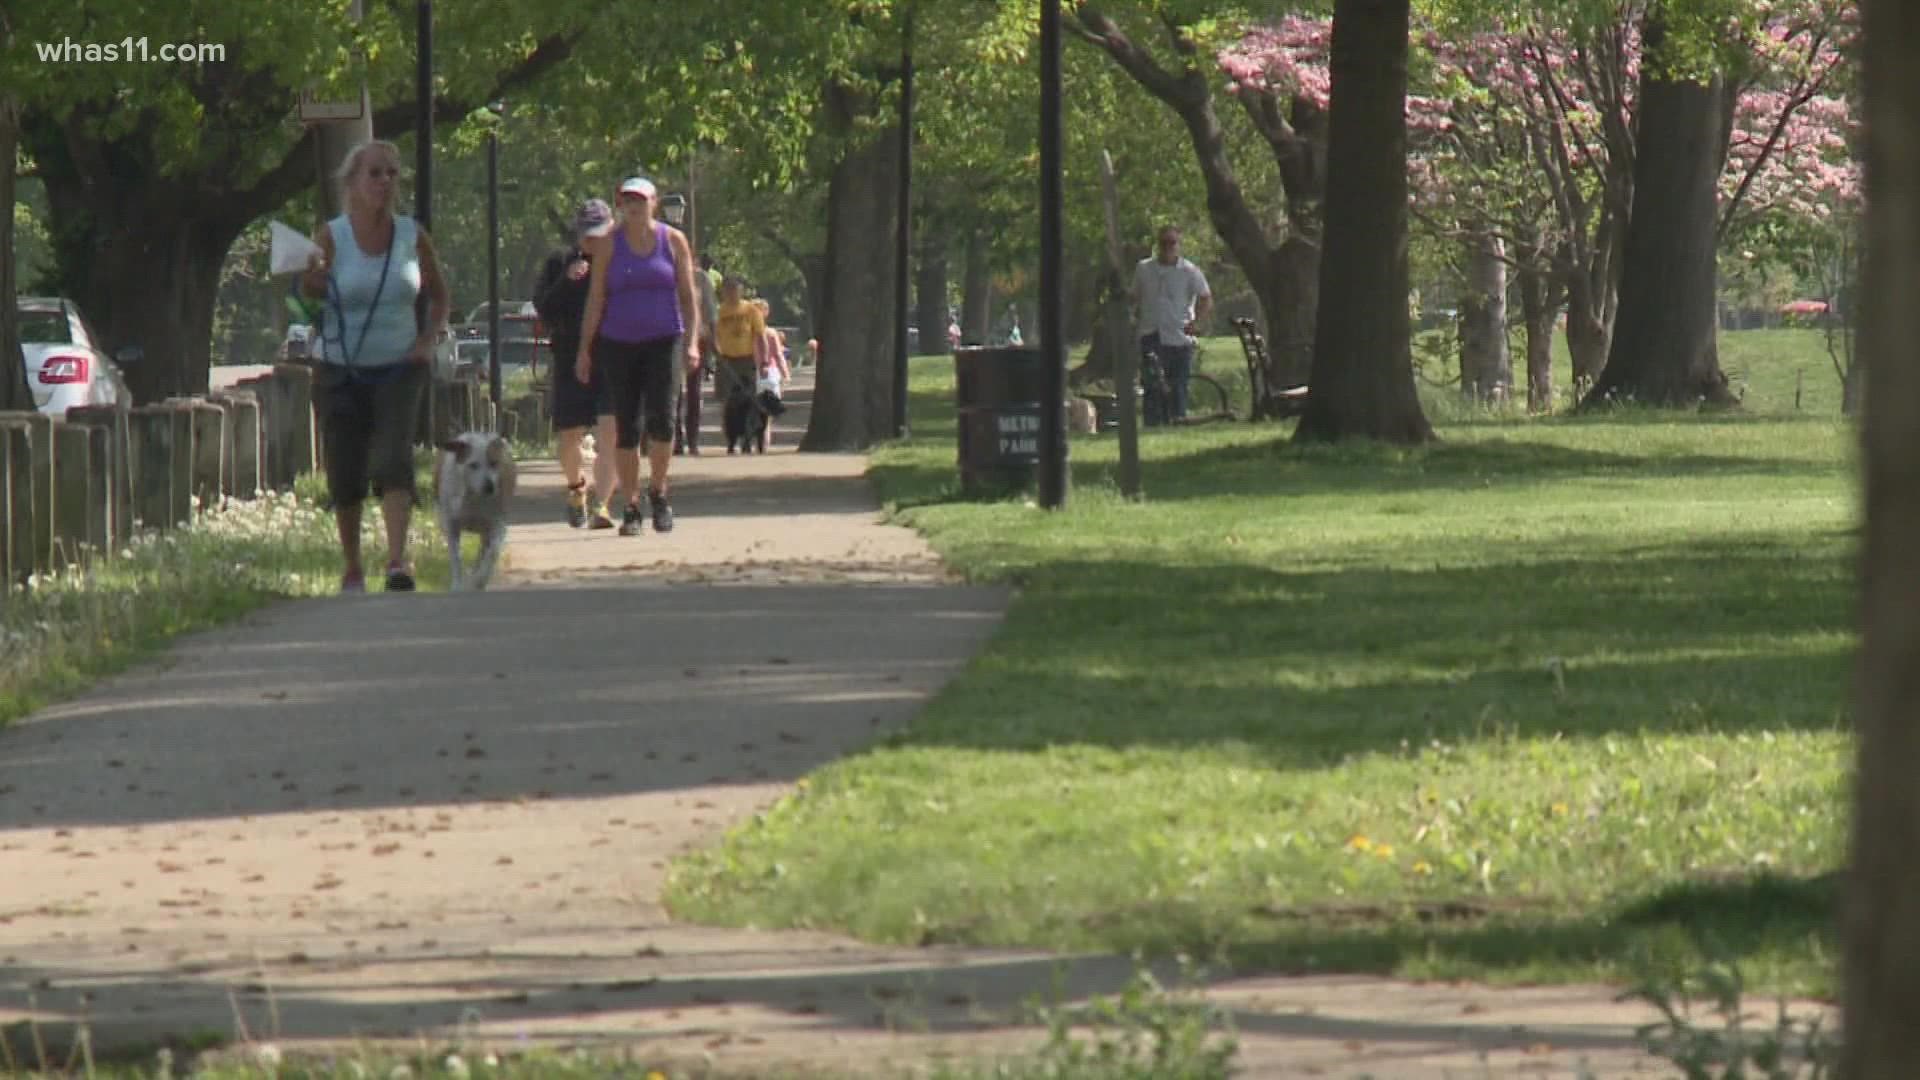 The rebranded Parks Alliance of Louisville, formerly known as the Louisville Parks Foundation, is pushing for equitable investment in city parks.